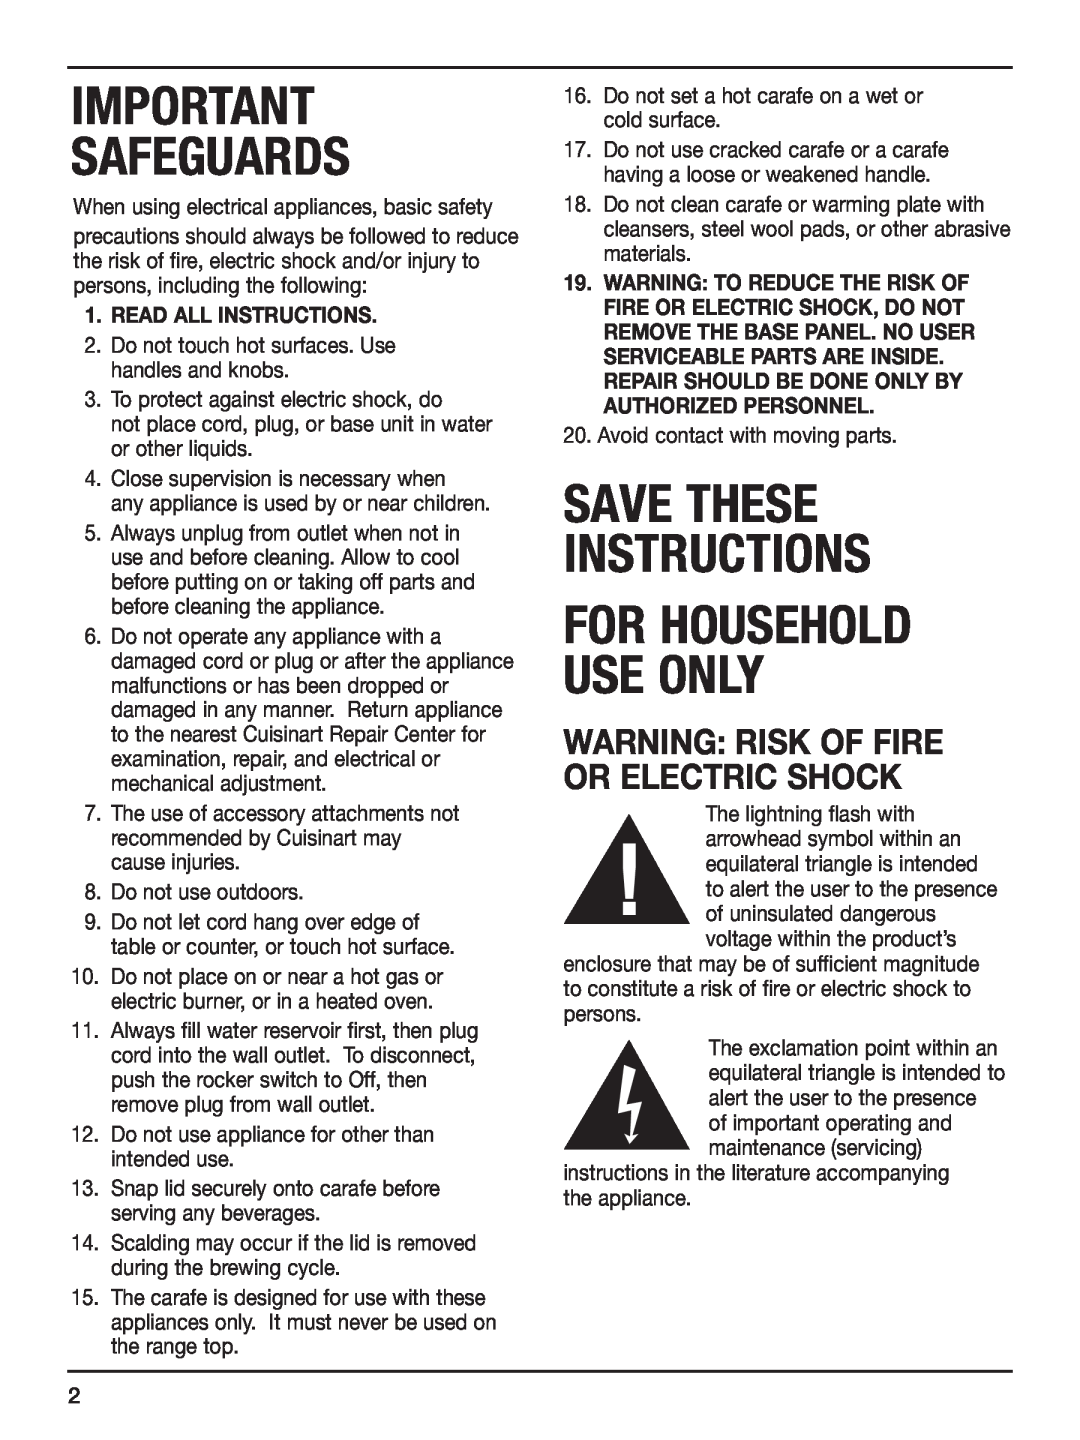 Cuisinart DCC-450 Safeguards, Save These Instructions, For Household Use Only, WARNING RISK Of FIRE OR ELECTRIC SHOCK 